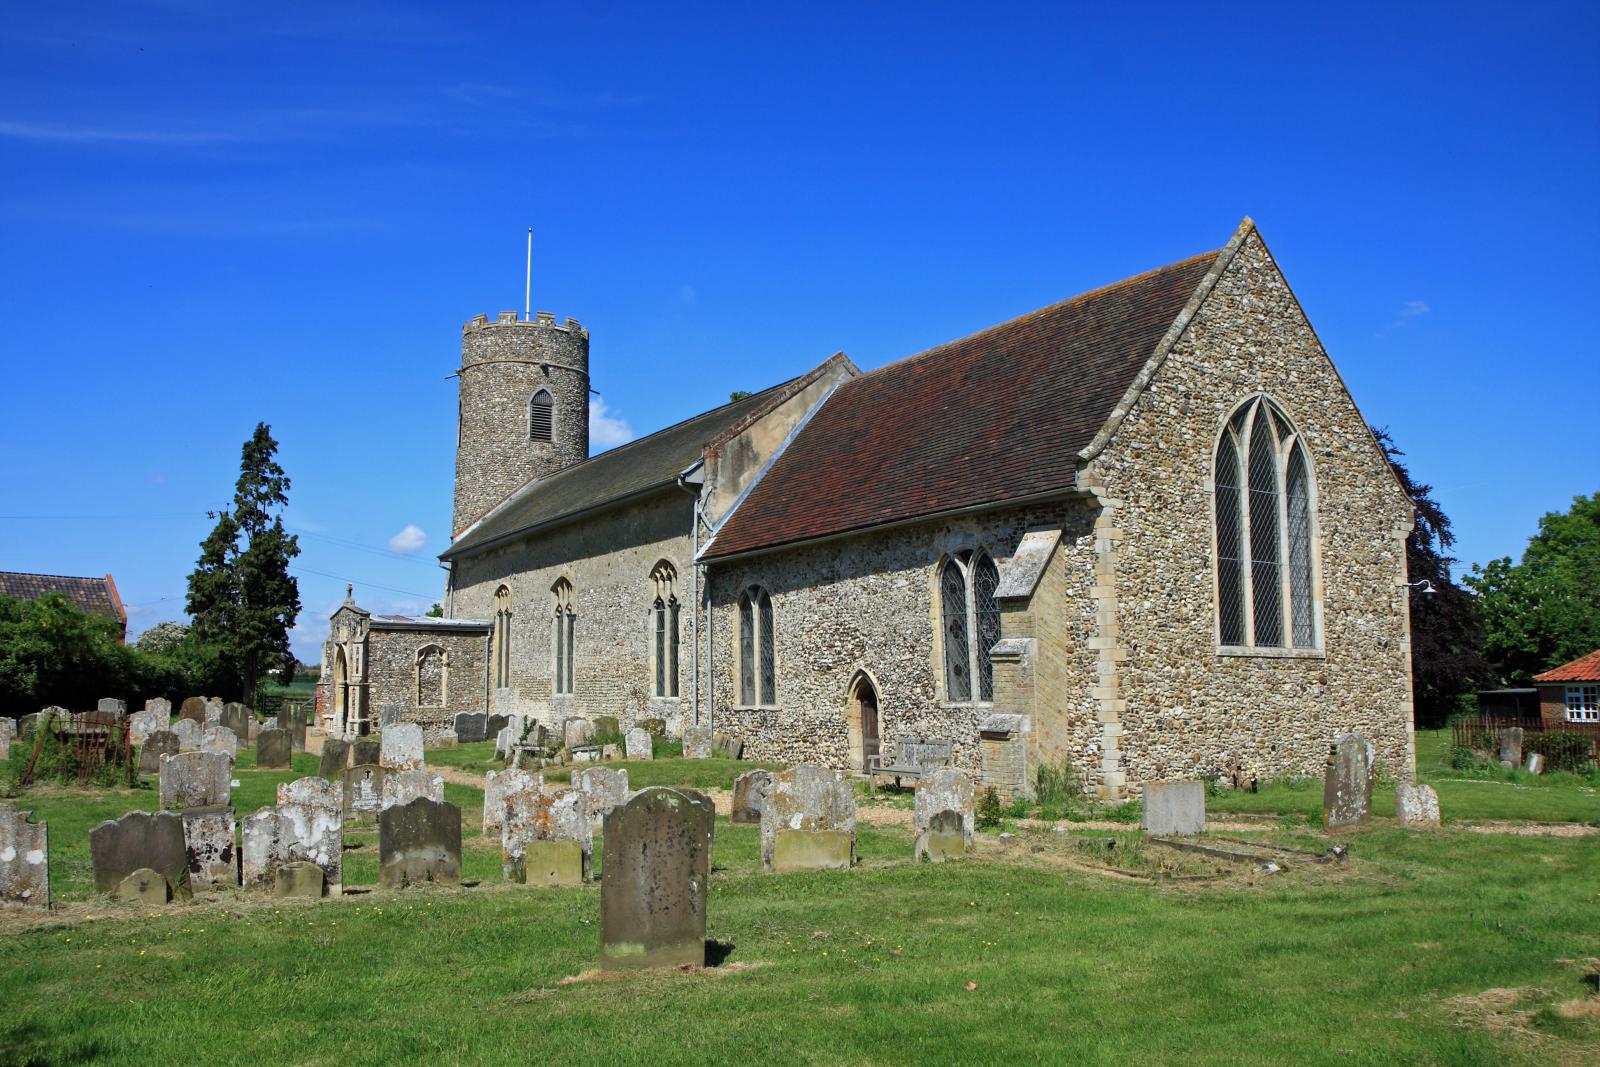 the stone building has many headstones and a tower